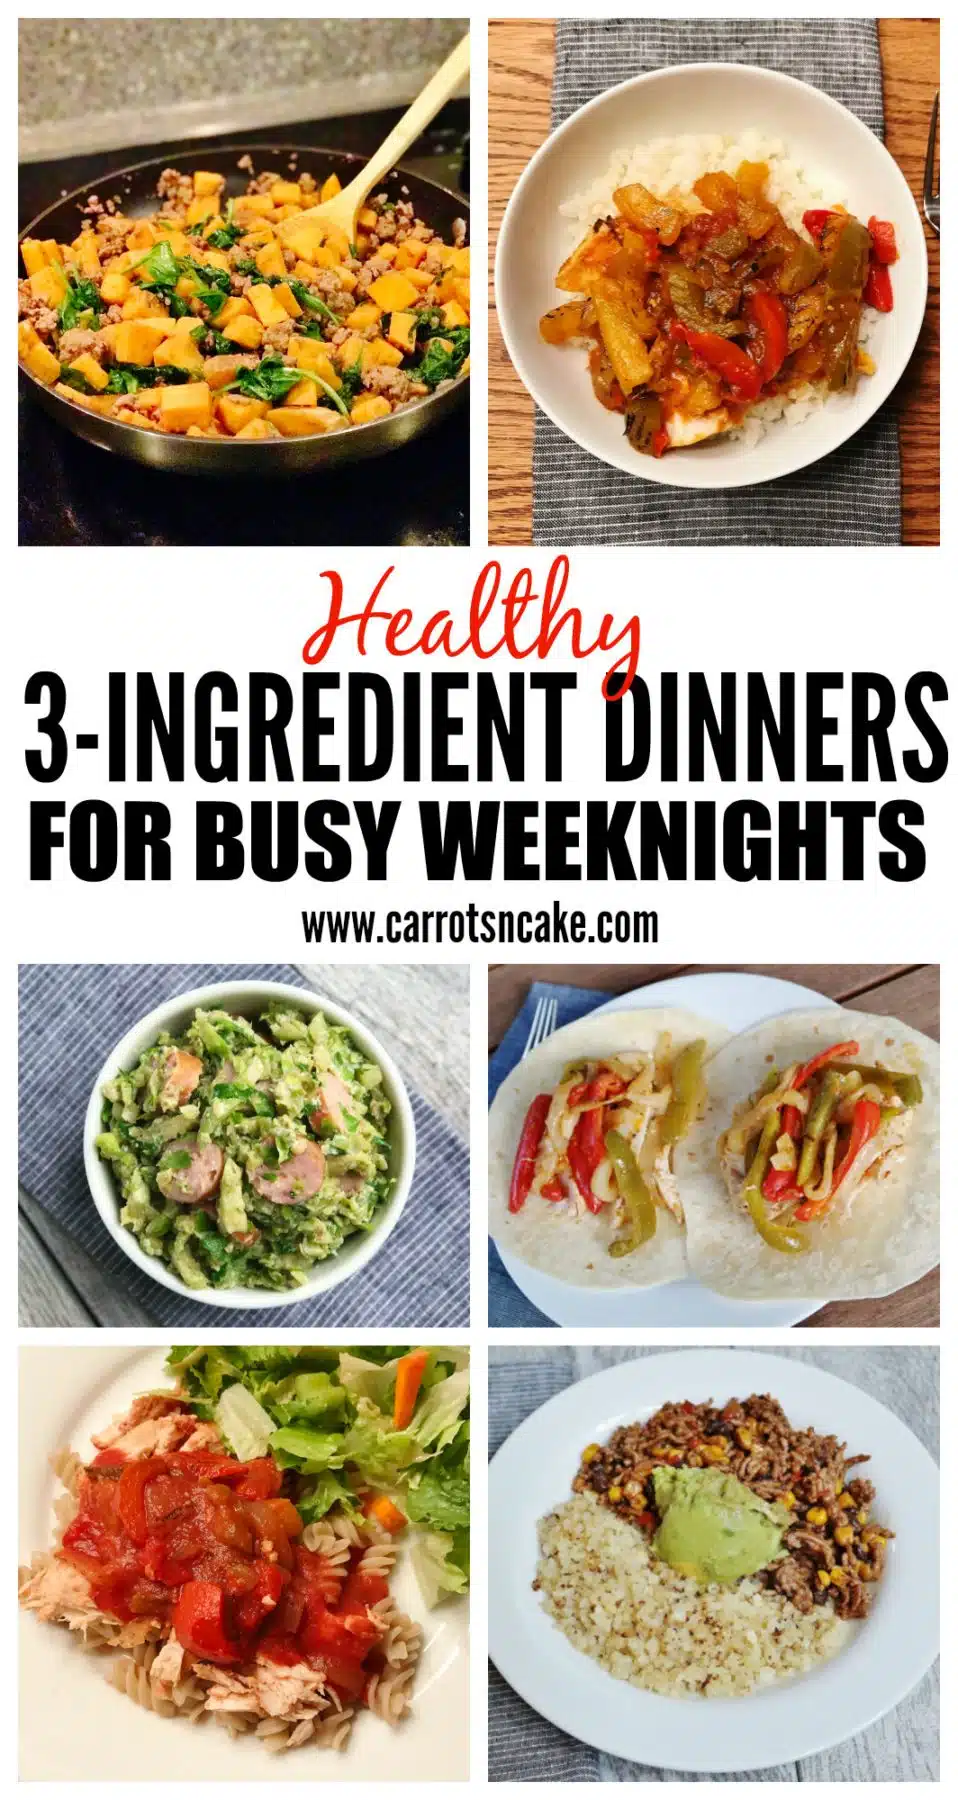 https://carrotsncake.com/wp-content/uploads/2016/12/Healthy-3-Ingredient-Dinners-for-Busy-Weeknights.jpg.webp